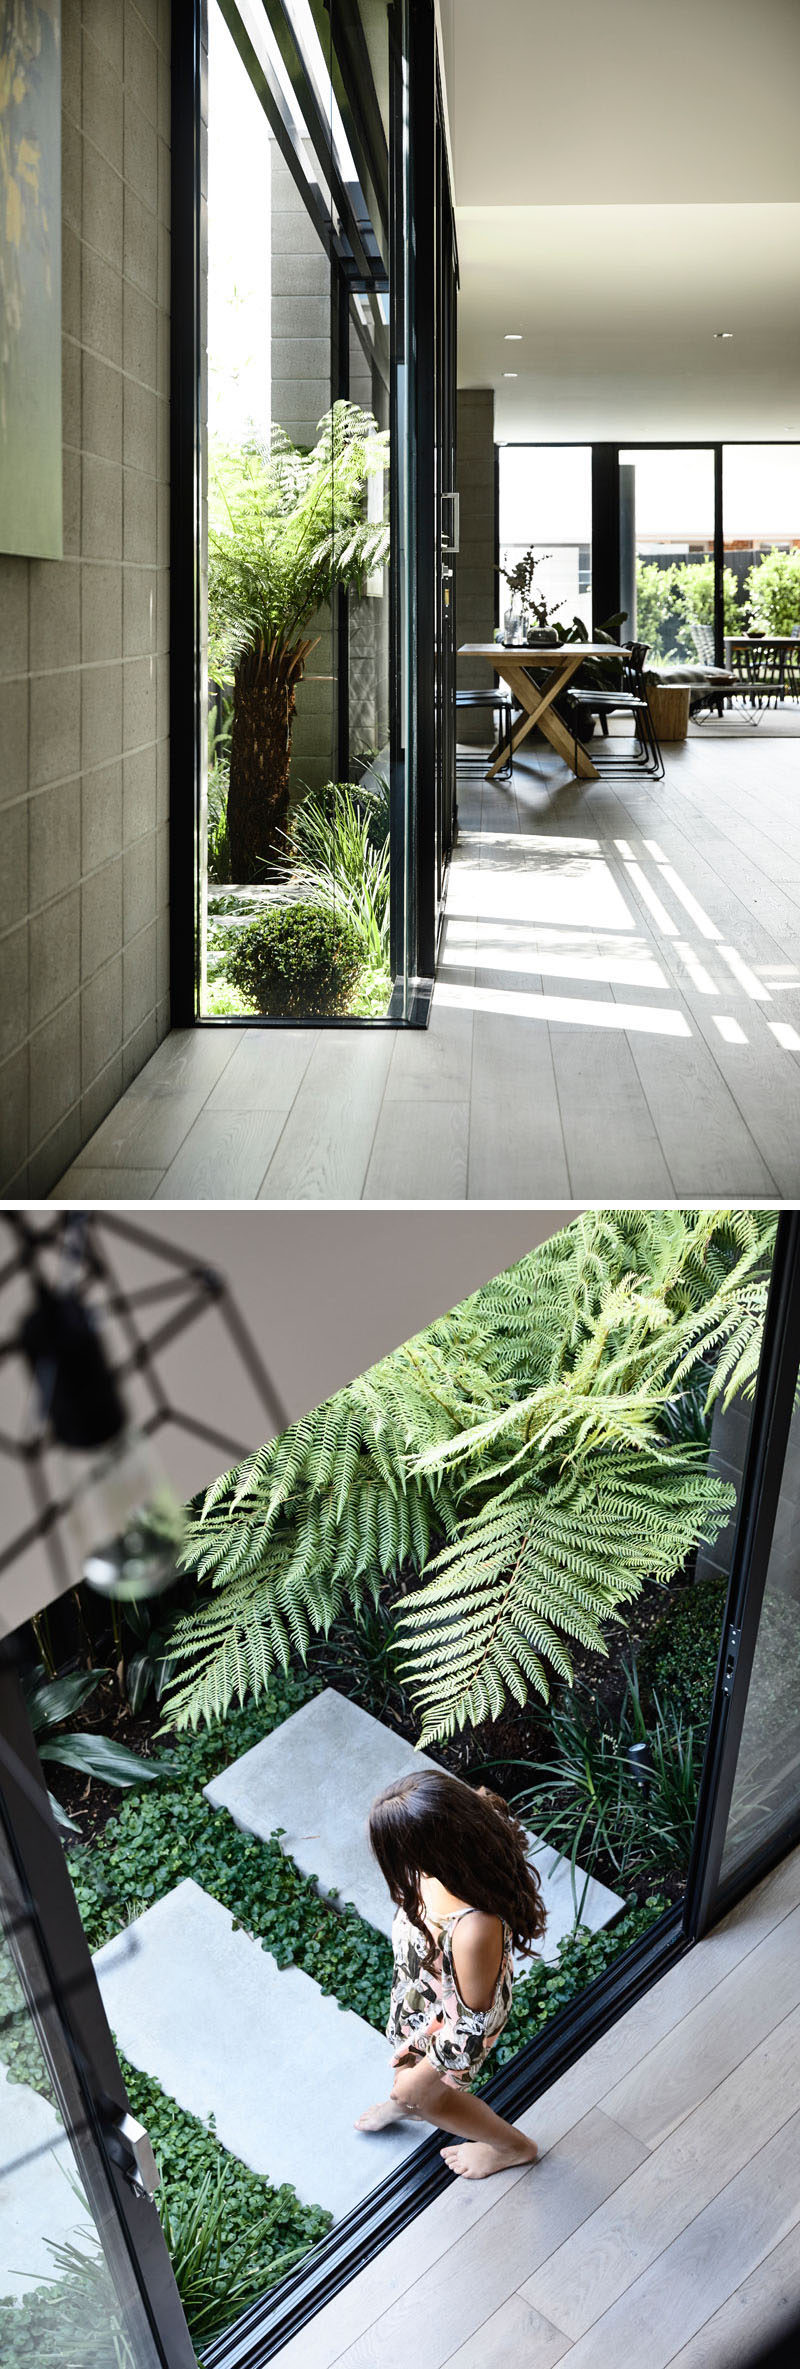 This modern house has a small side courtyard that can be accessed through sliding glass doors. #Landscaping #Garden